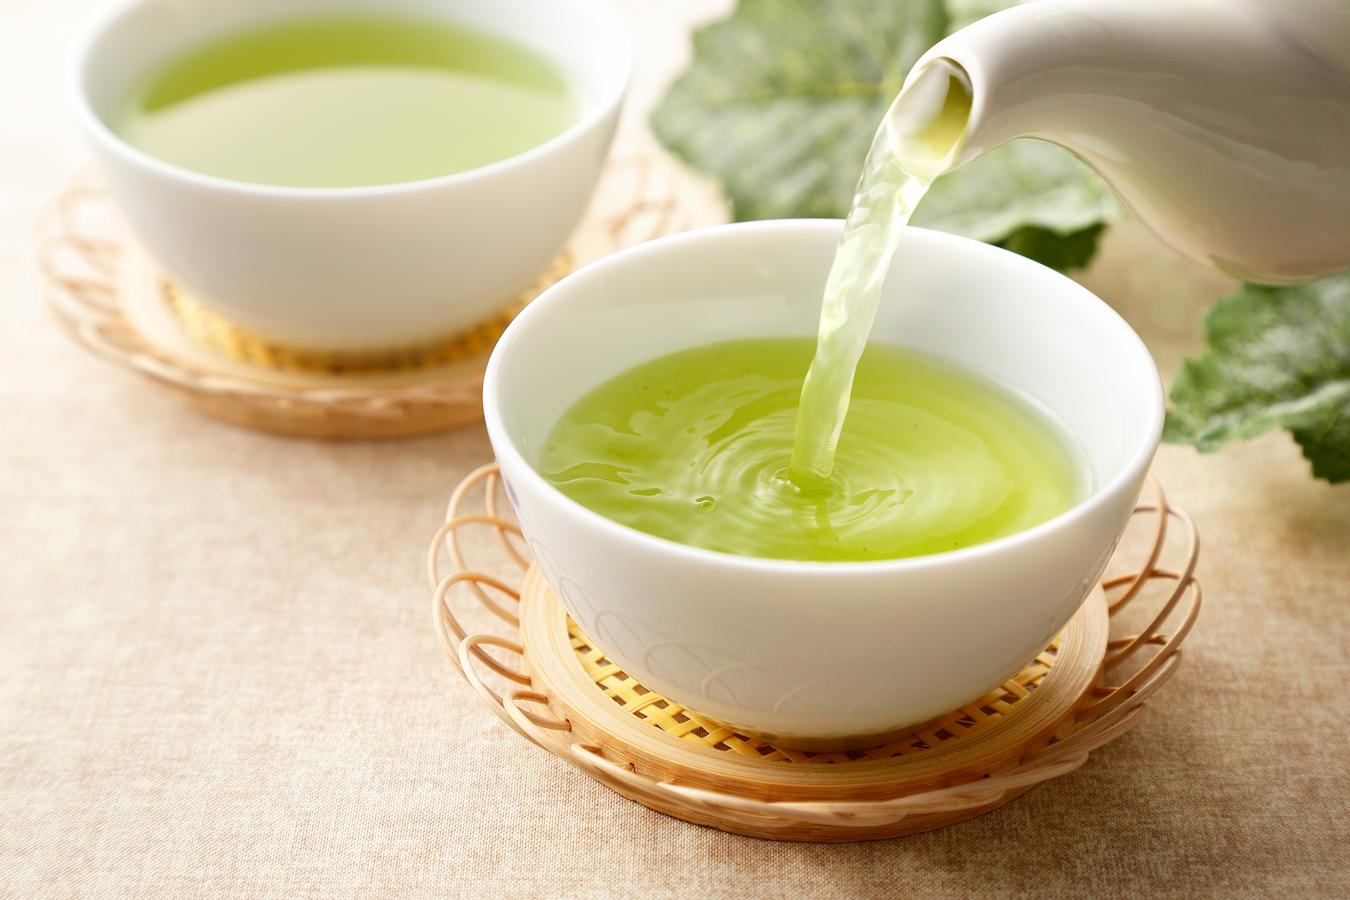 someone pouring a cup of green tea brewing green tea how to make green tea iced green tea leaves lemon juice brew green tea recipe add honey perfect cup